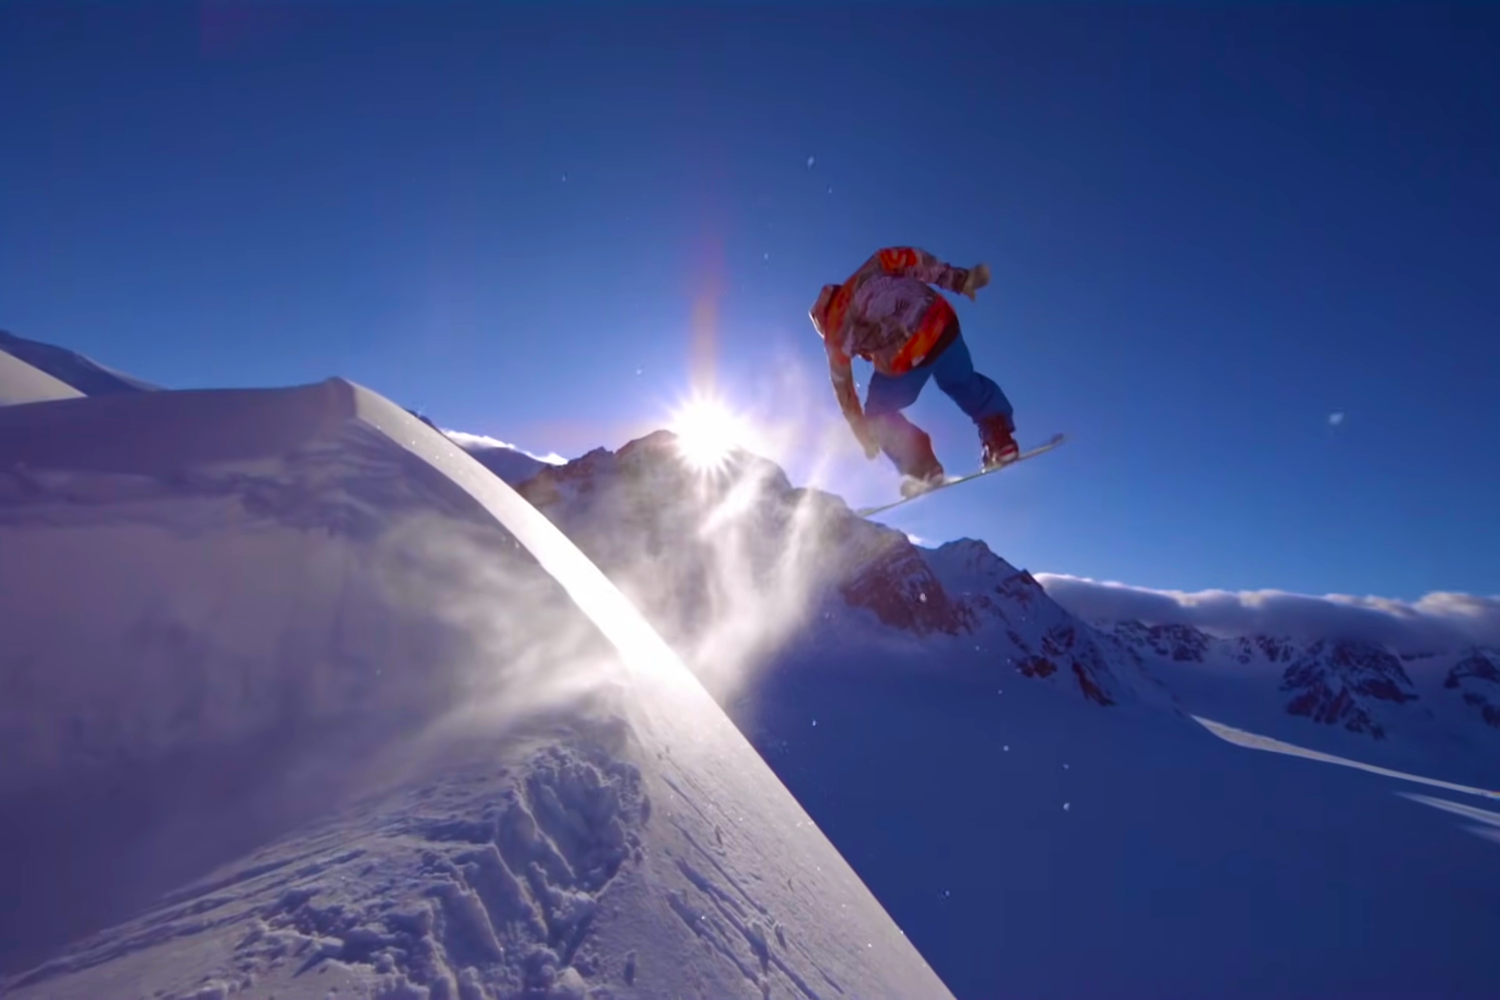 The 8 best snowboarding movies and documentaries to add to your watch list 